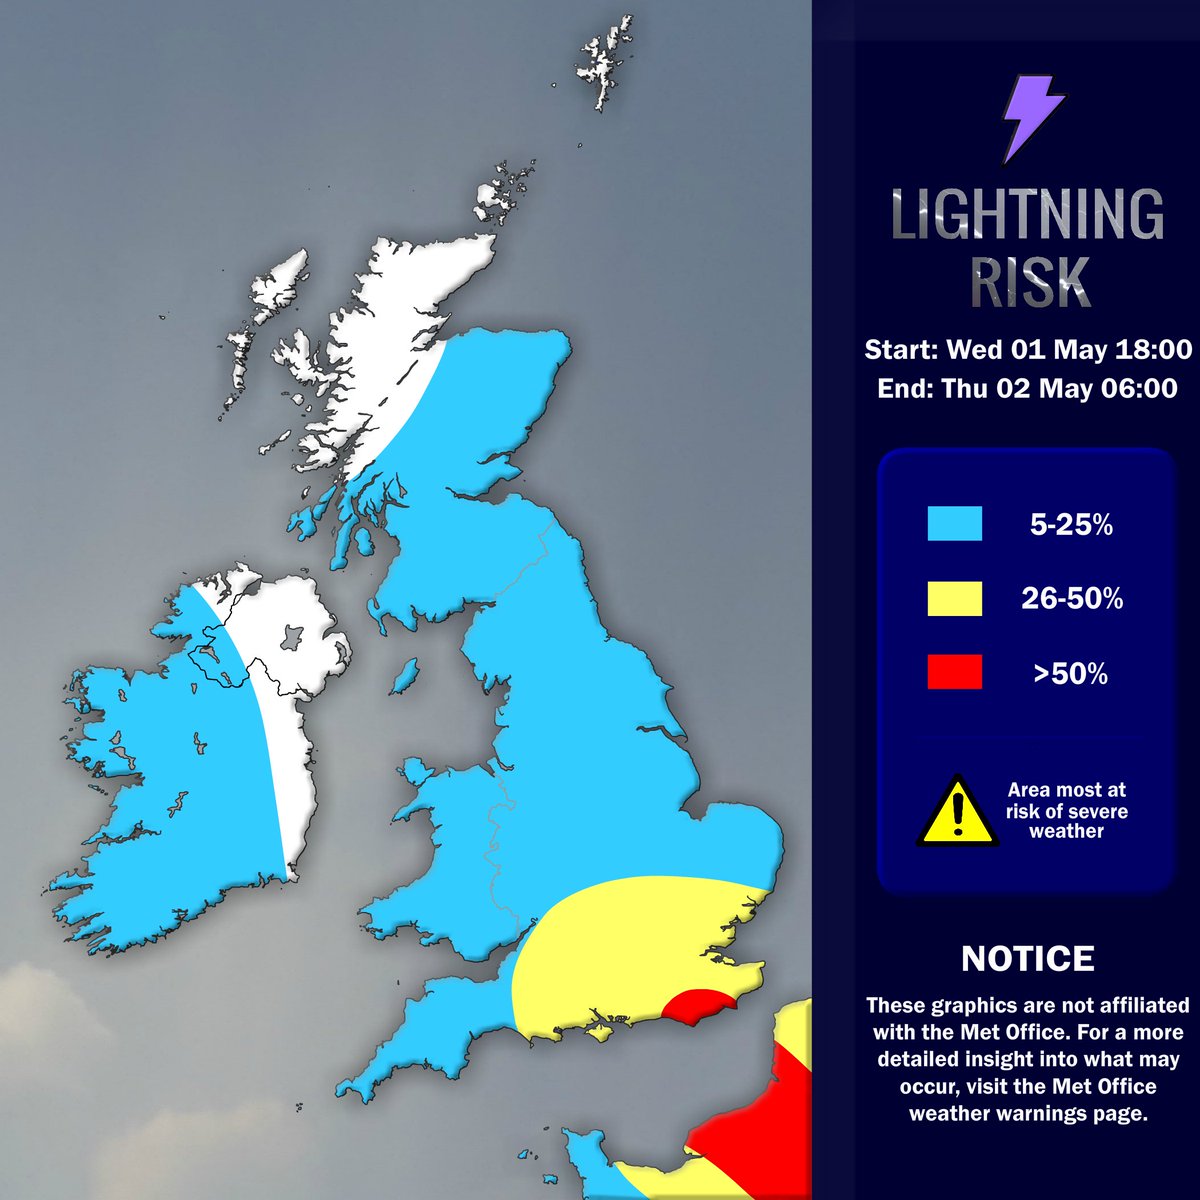 Today's lightning risk map has been updated ahead of the severe weather threat for tonight and into tomorrow. Unfortunately, there are still model discrepancies, but thunderstorms will be possible almost anywhere over S England with frequent lightning and potentially large hail.